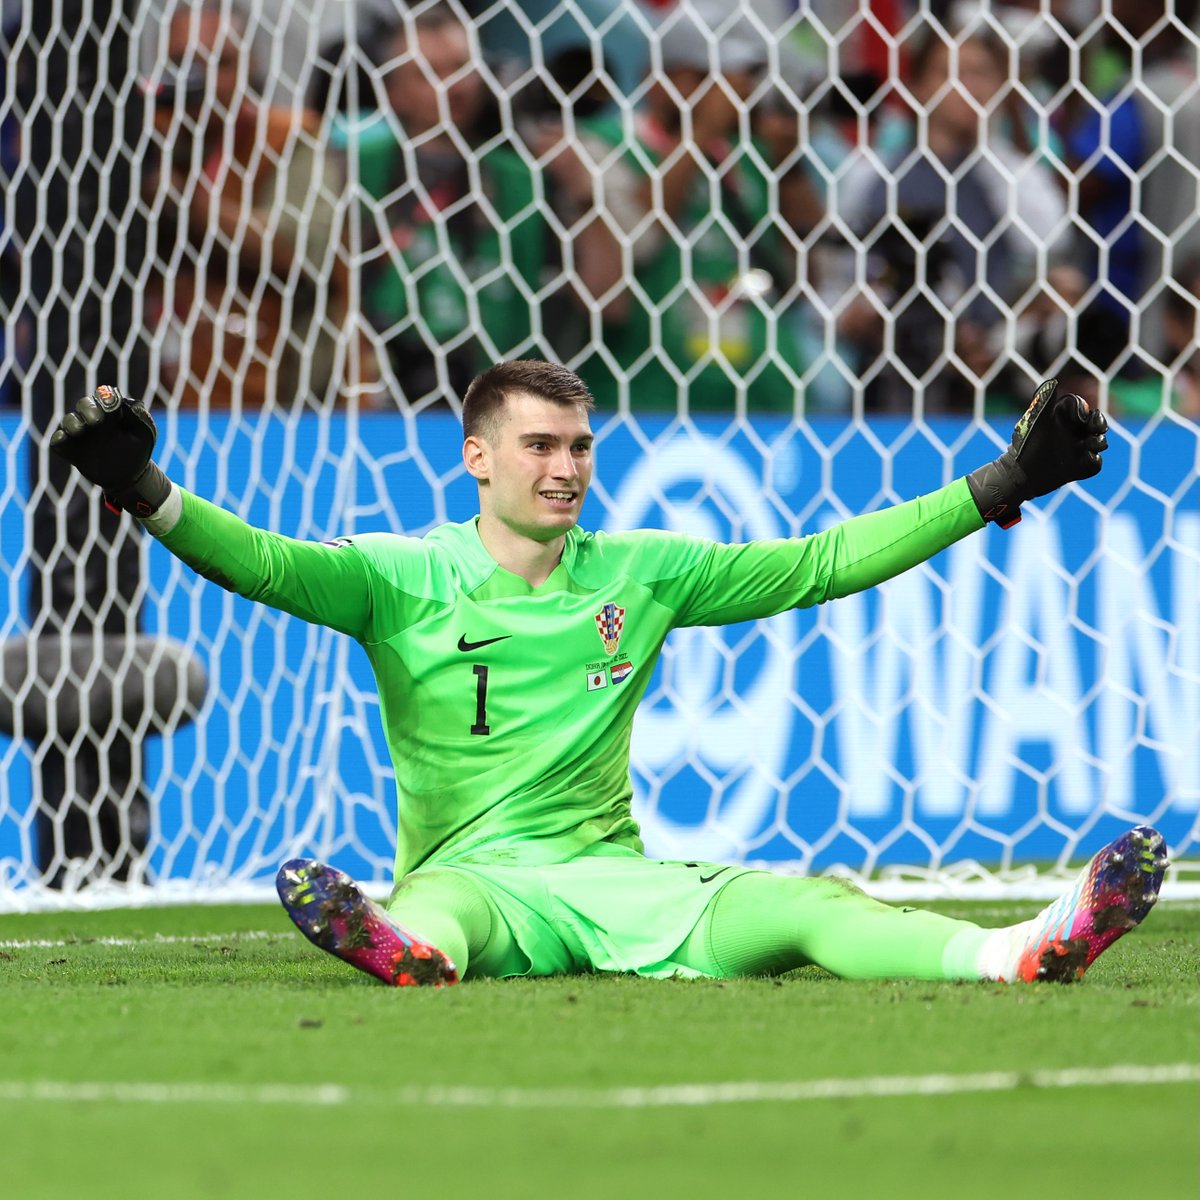 🇭🇷 Croatia's hero 🇭🇷

A hat-trick of penalty saves! 👏

#FIFAWorldCup | #Qatar2022